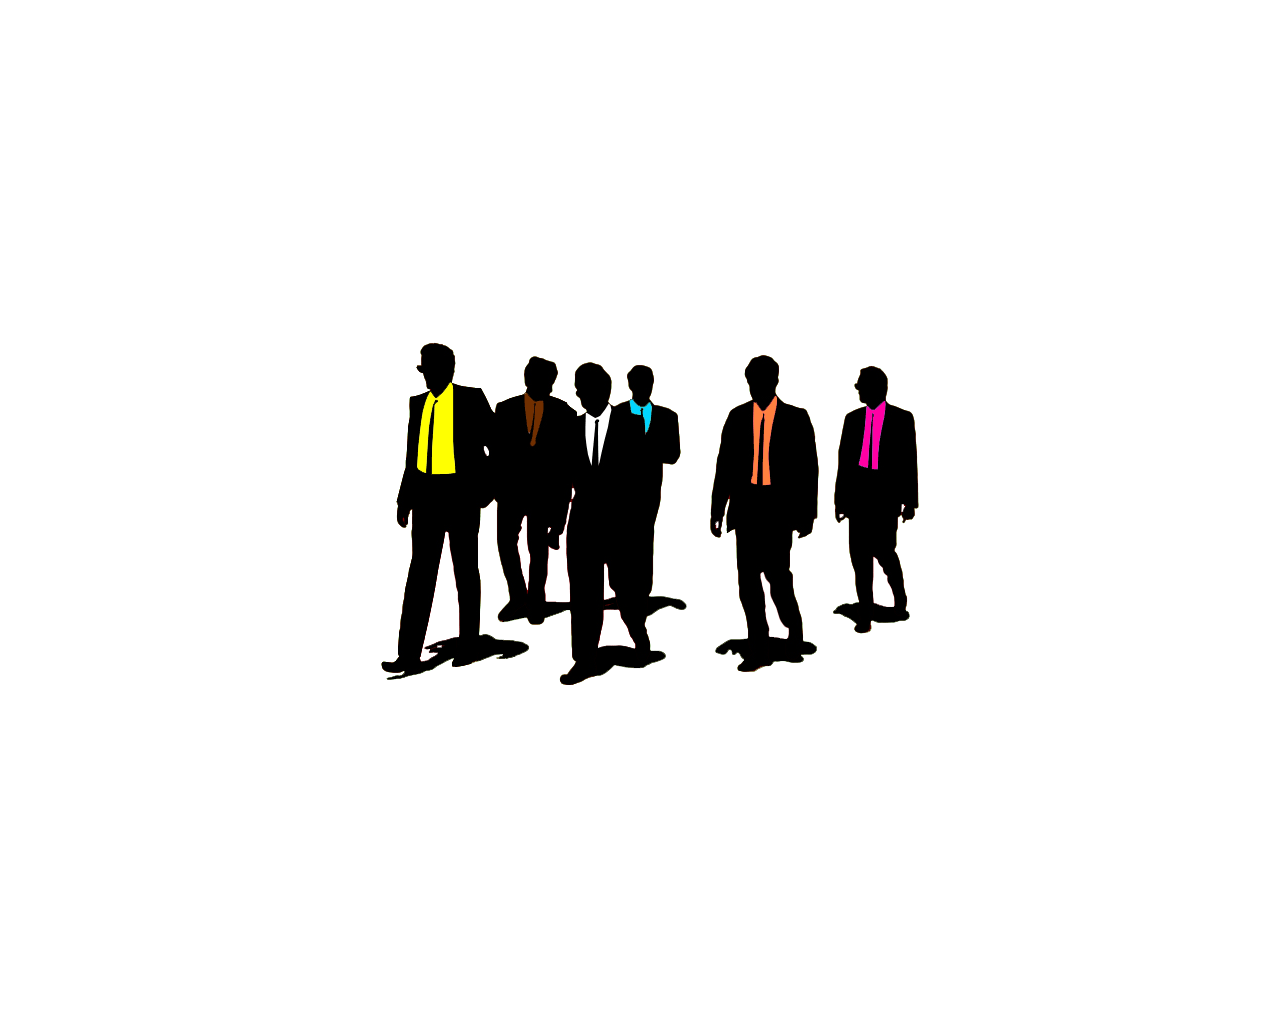 Movie Reservoir Dogs Wallpaper 1920x1080 px Free Download